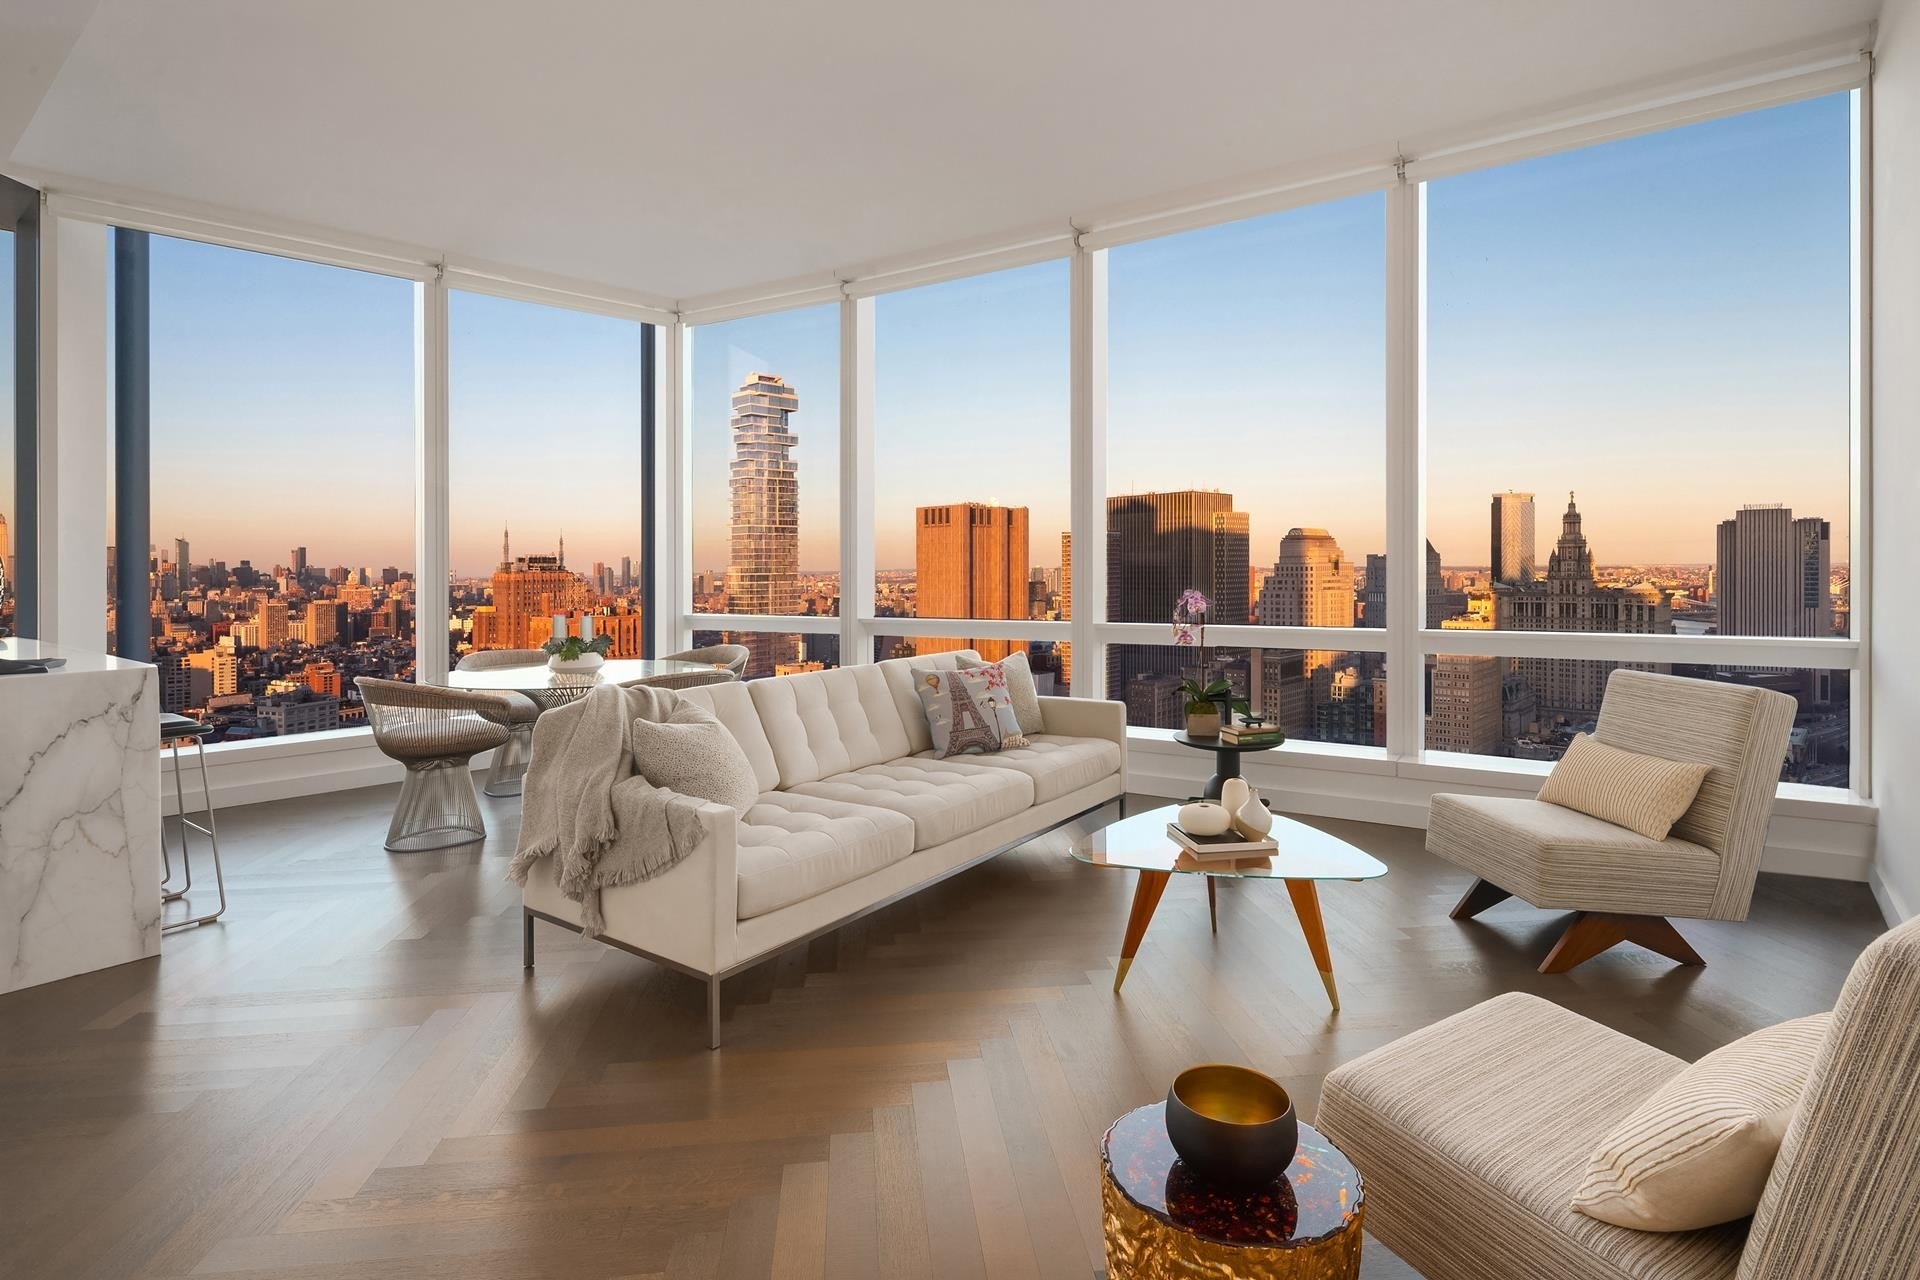 Property at One Eleven Murray S, 111 MURRAY ST, 41A TriBeCa, New York, NY 10007